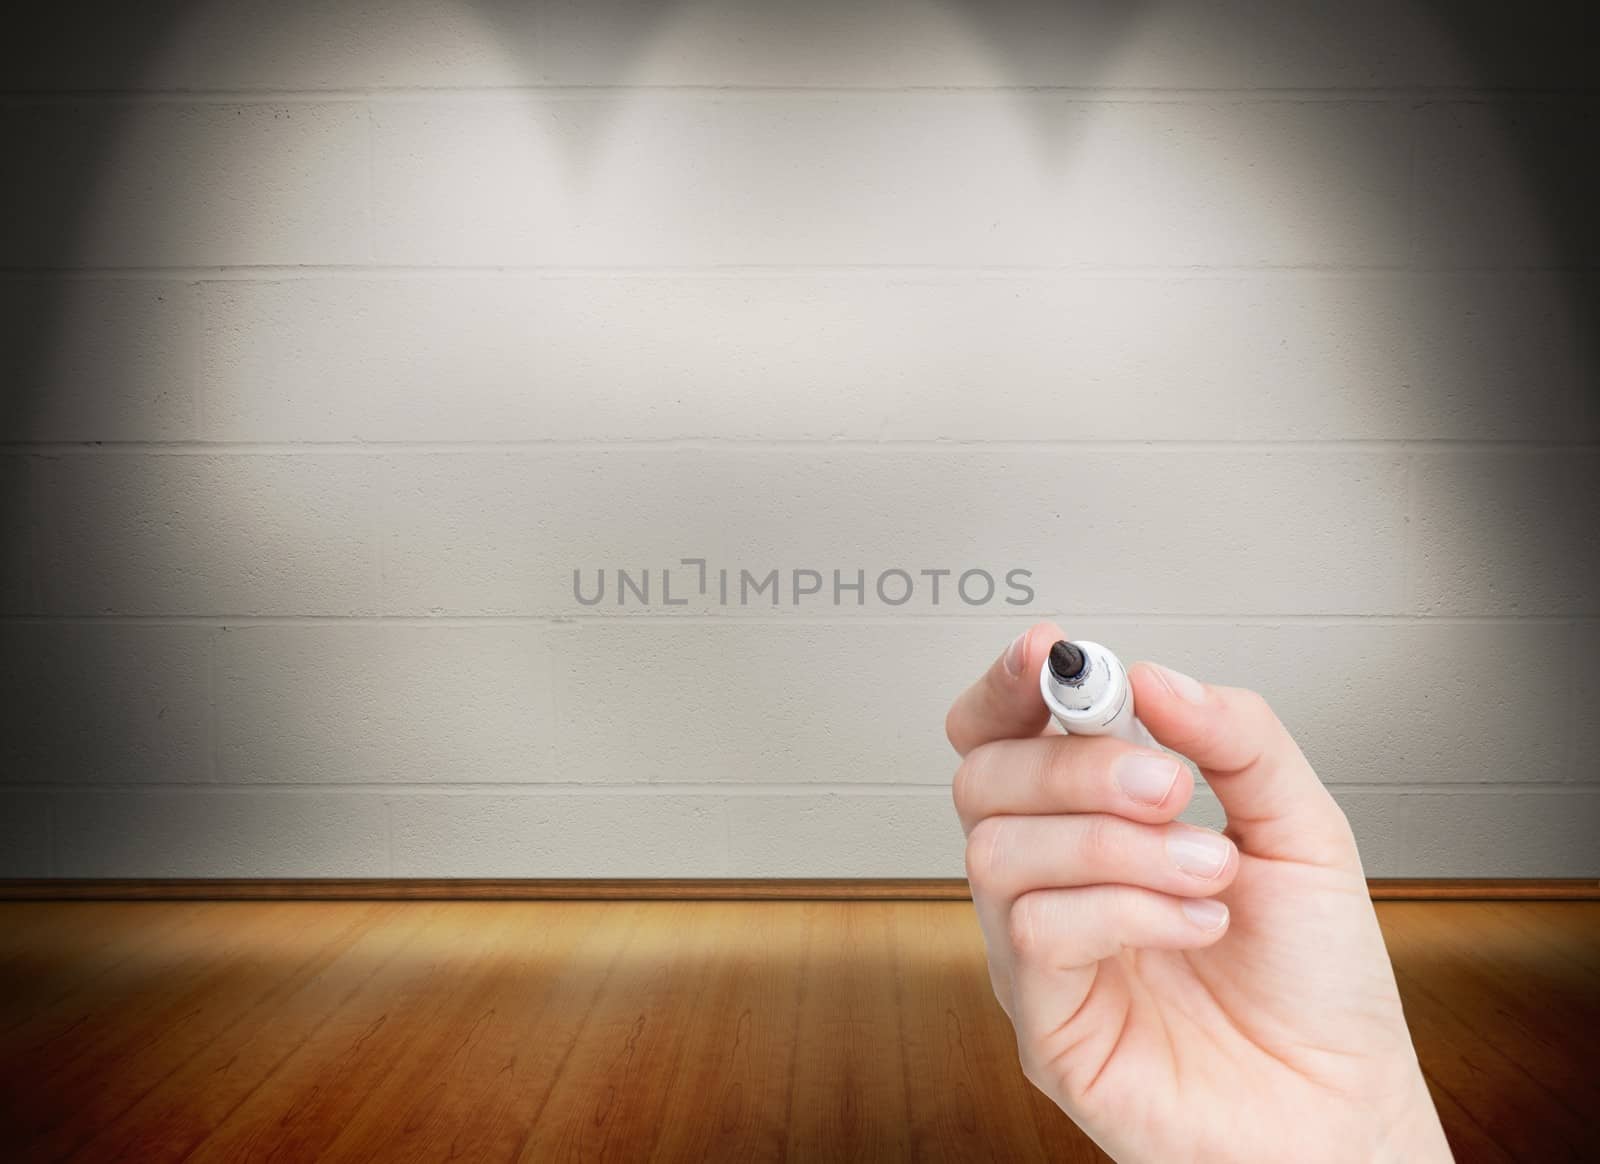 Composite image of female hand holding black whiteboard marker in bright room